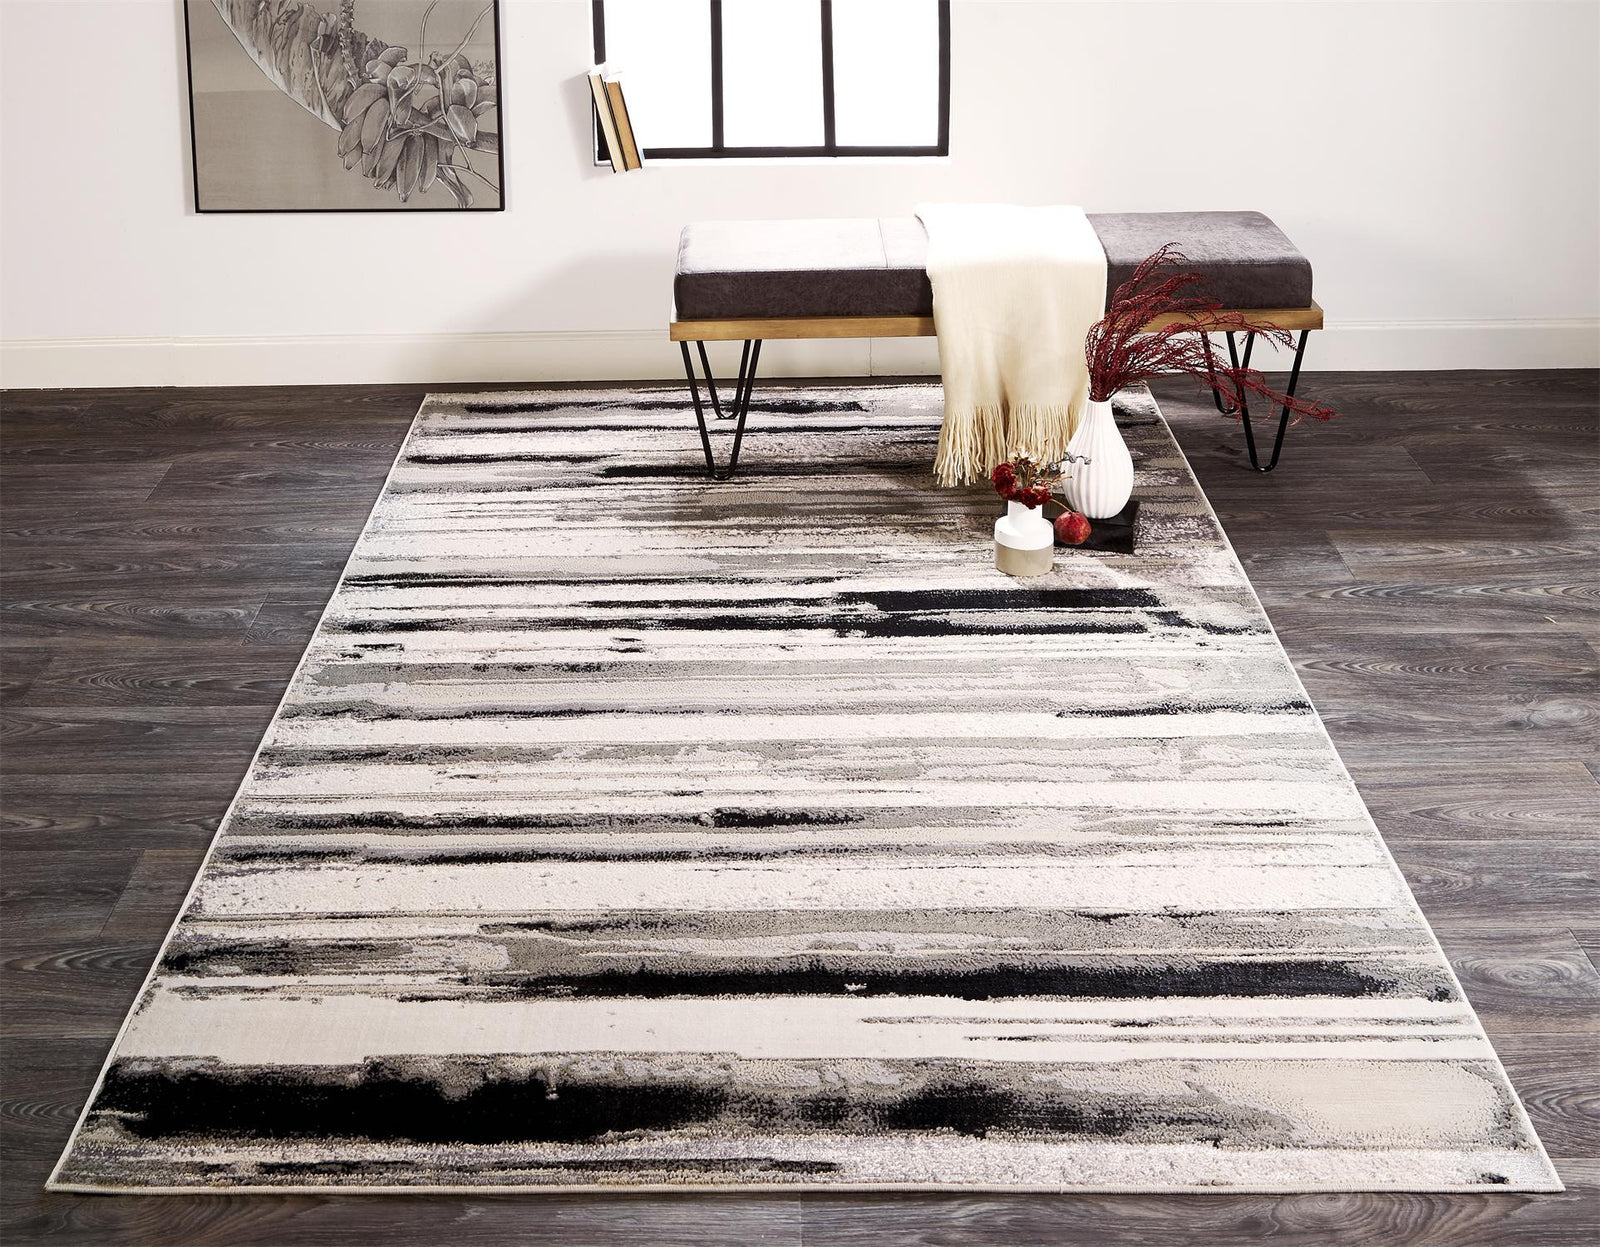 4' X 6' Silver Gray And Black Abstract Area Rug